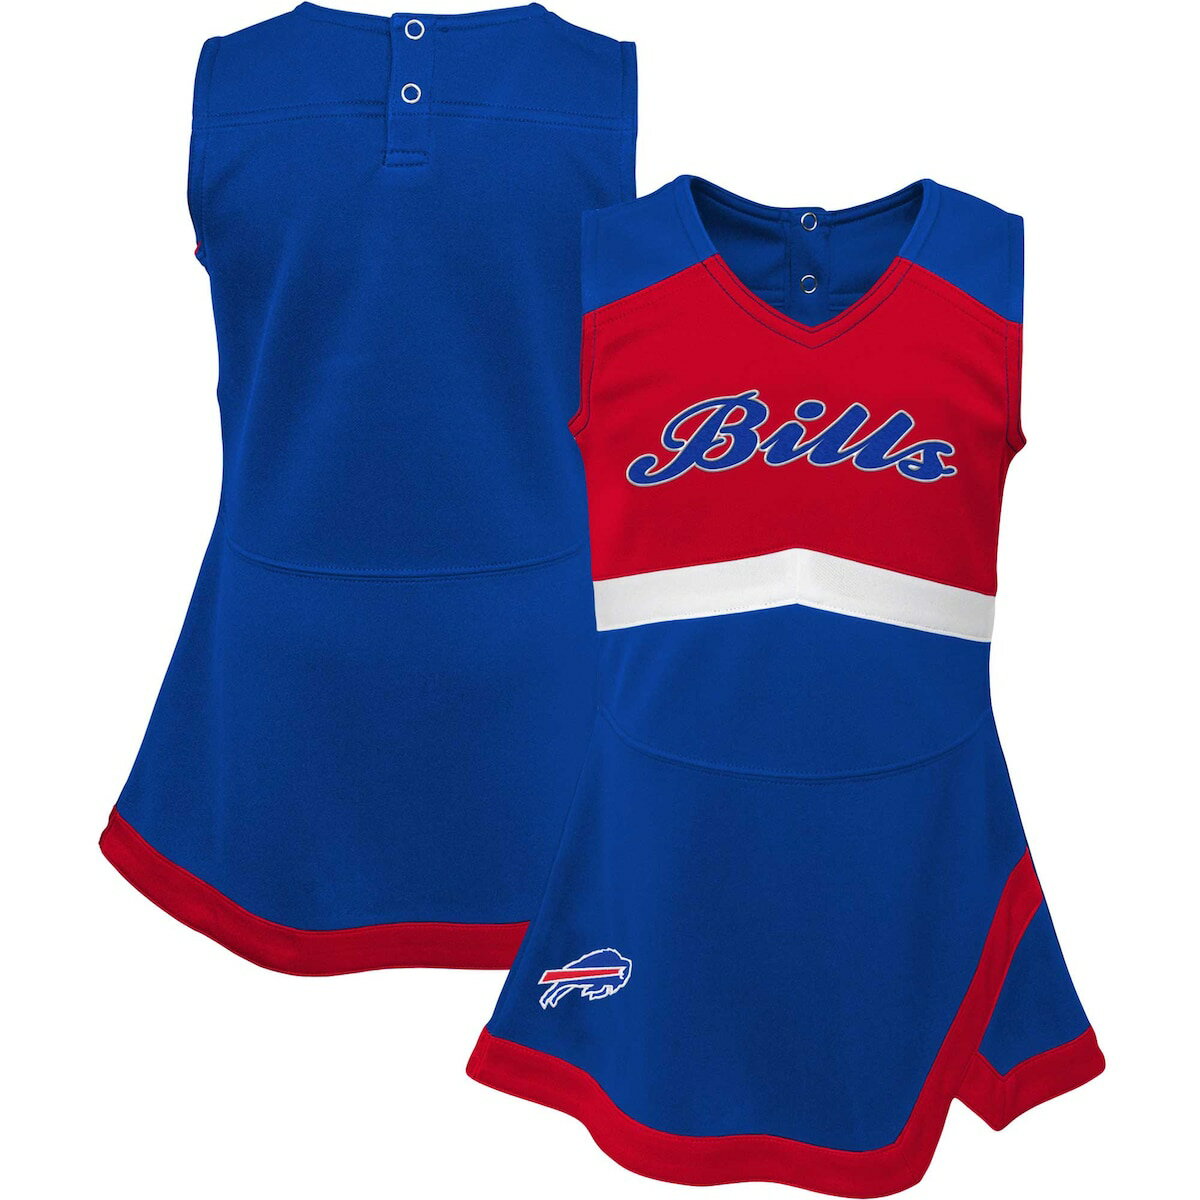 Your young little one looks like the ultimate Buffalo Bills cheerleader in this Captain Jumper dress. It features a sleeveless construction and lightweight material that allows them to move freely. An unmistakable Buffalo Bills design with bold team graphics and accents makes your tot the cutest fan in the room.ImportedOfficially licensedTwo-snap closure at back neckEmbroidered fabric appliqueSleevelessBrand: OuterstuffMaterial: 100% PolyesterOutseam on size 24M measures approx. 12.5"Machine wash, tumble dry low